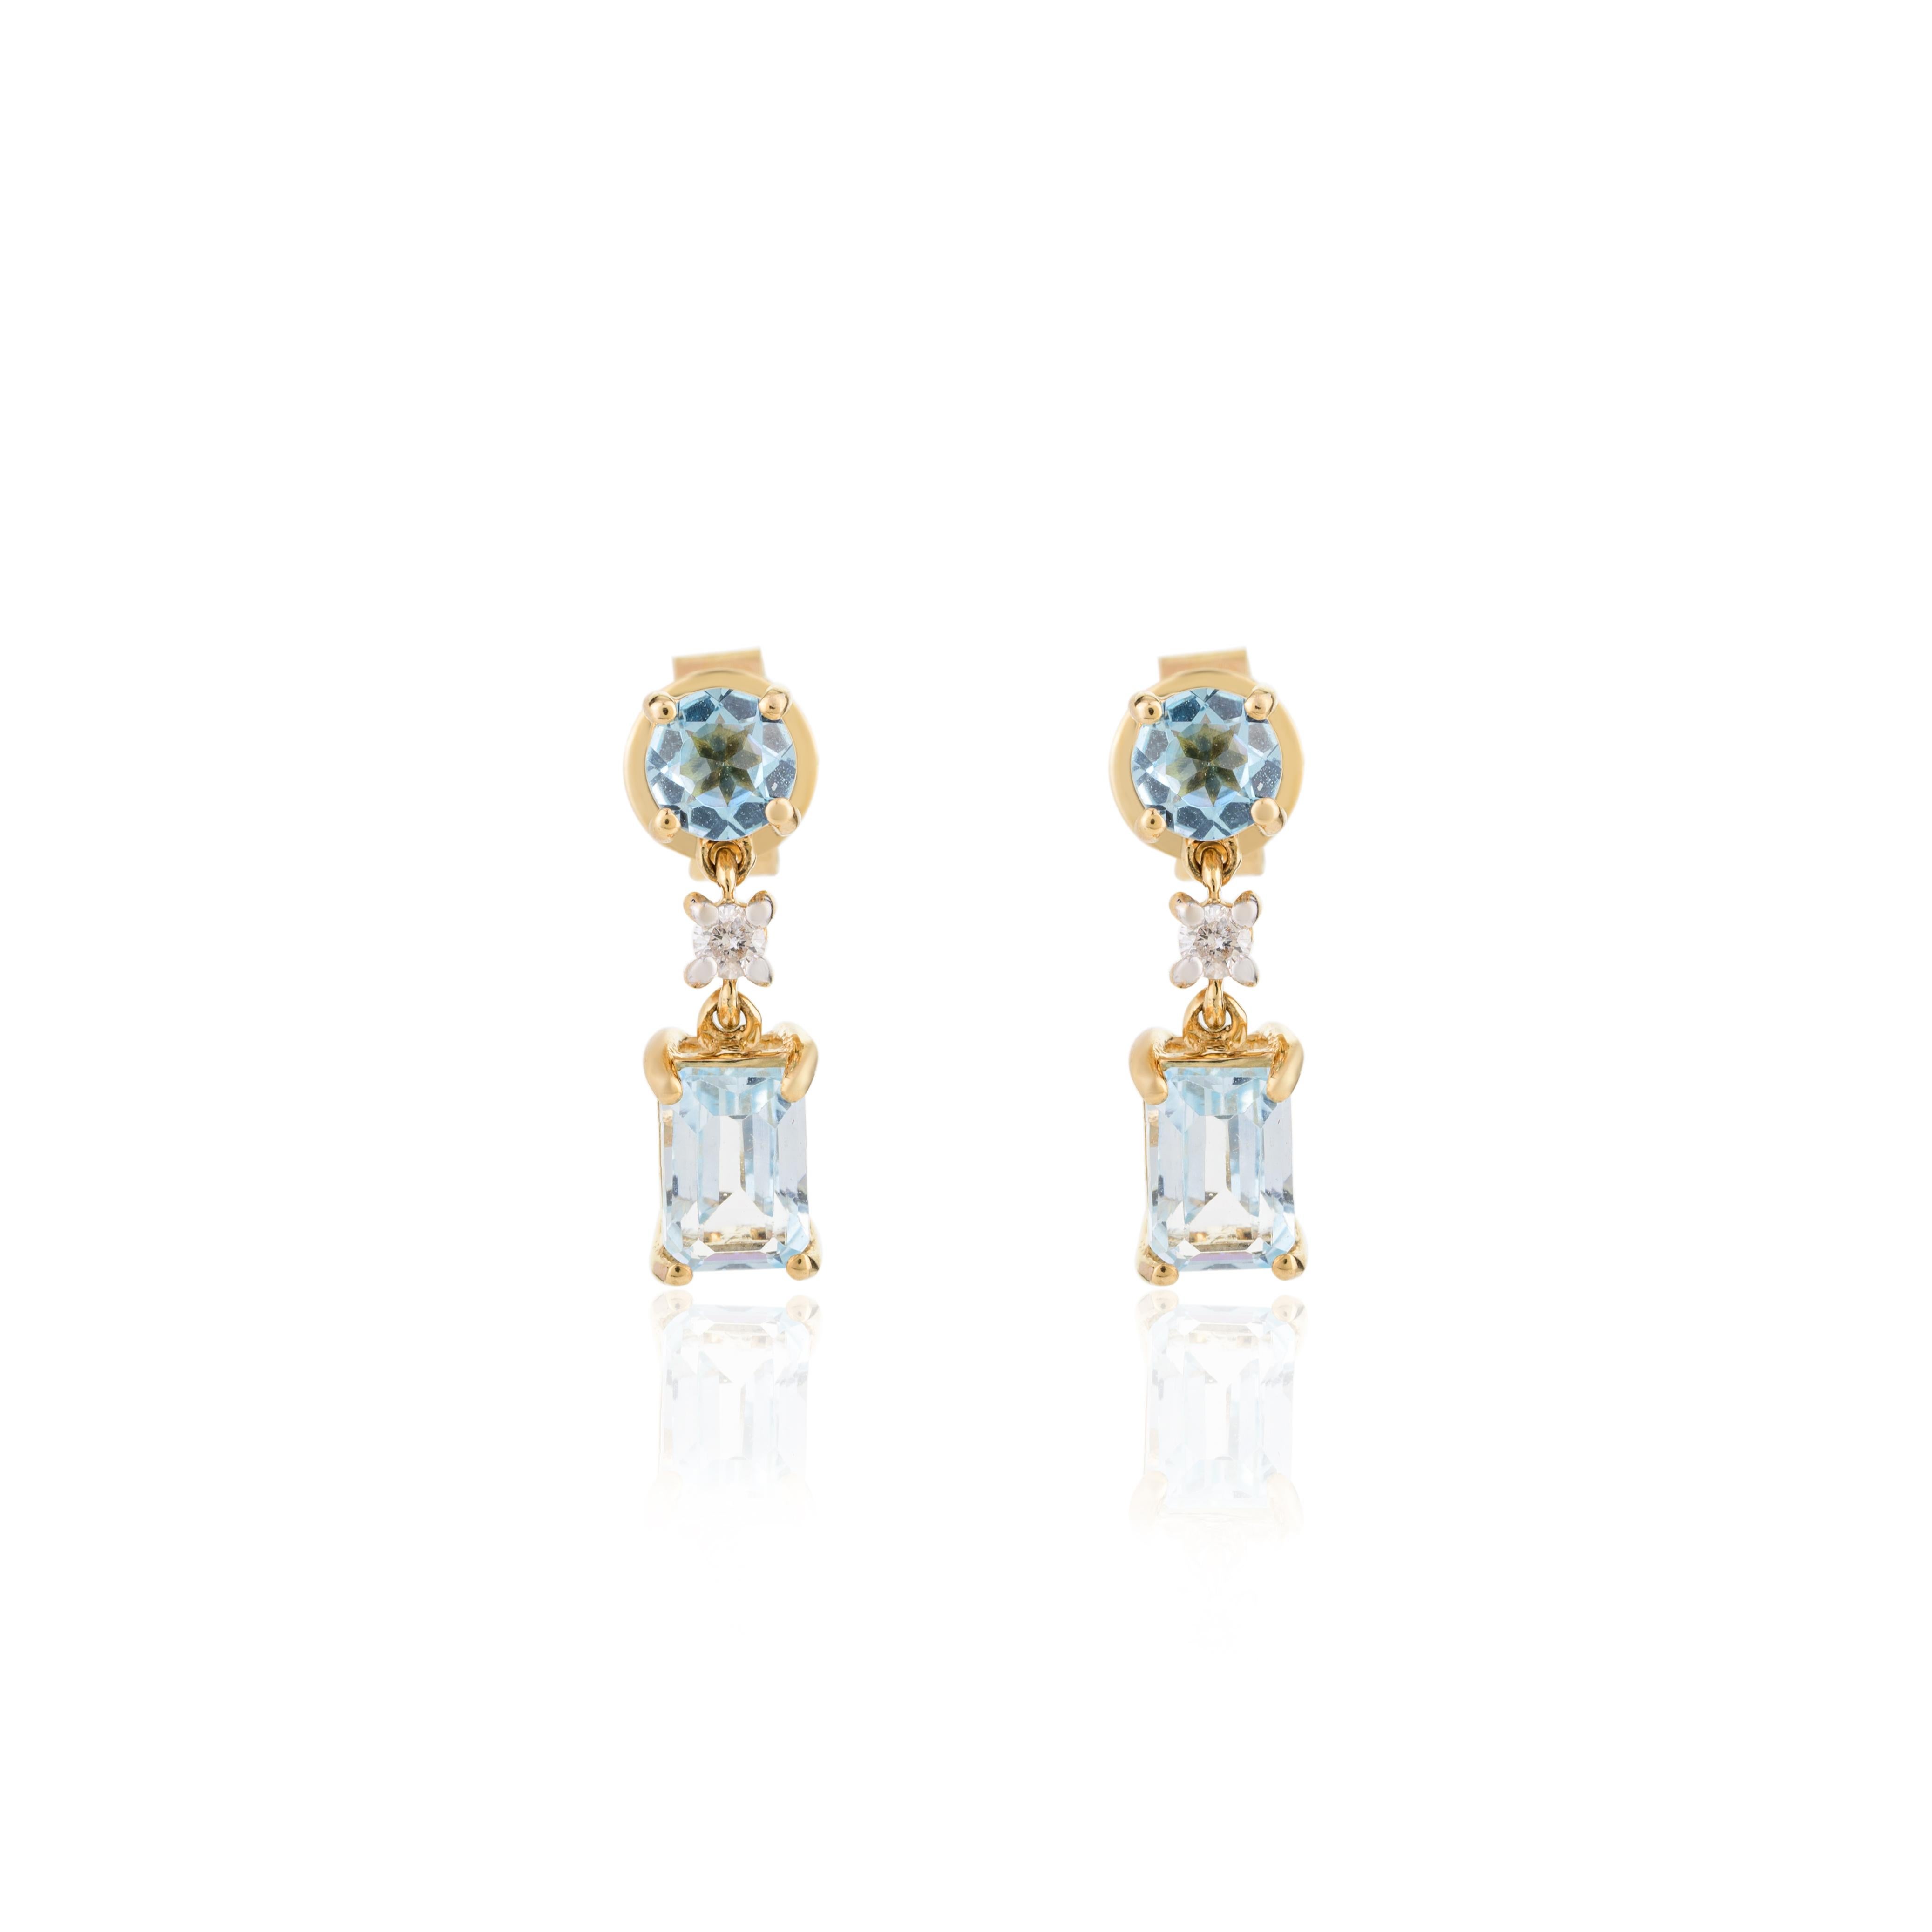 2 Carat Blue Topaz Drop Earrings in 18K Gold to make a statement with your look. You shall need dangle earrings to make a statement with your look. These earrings create a sparkling, luxurious look featuring baguette and round cut topaz and round